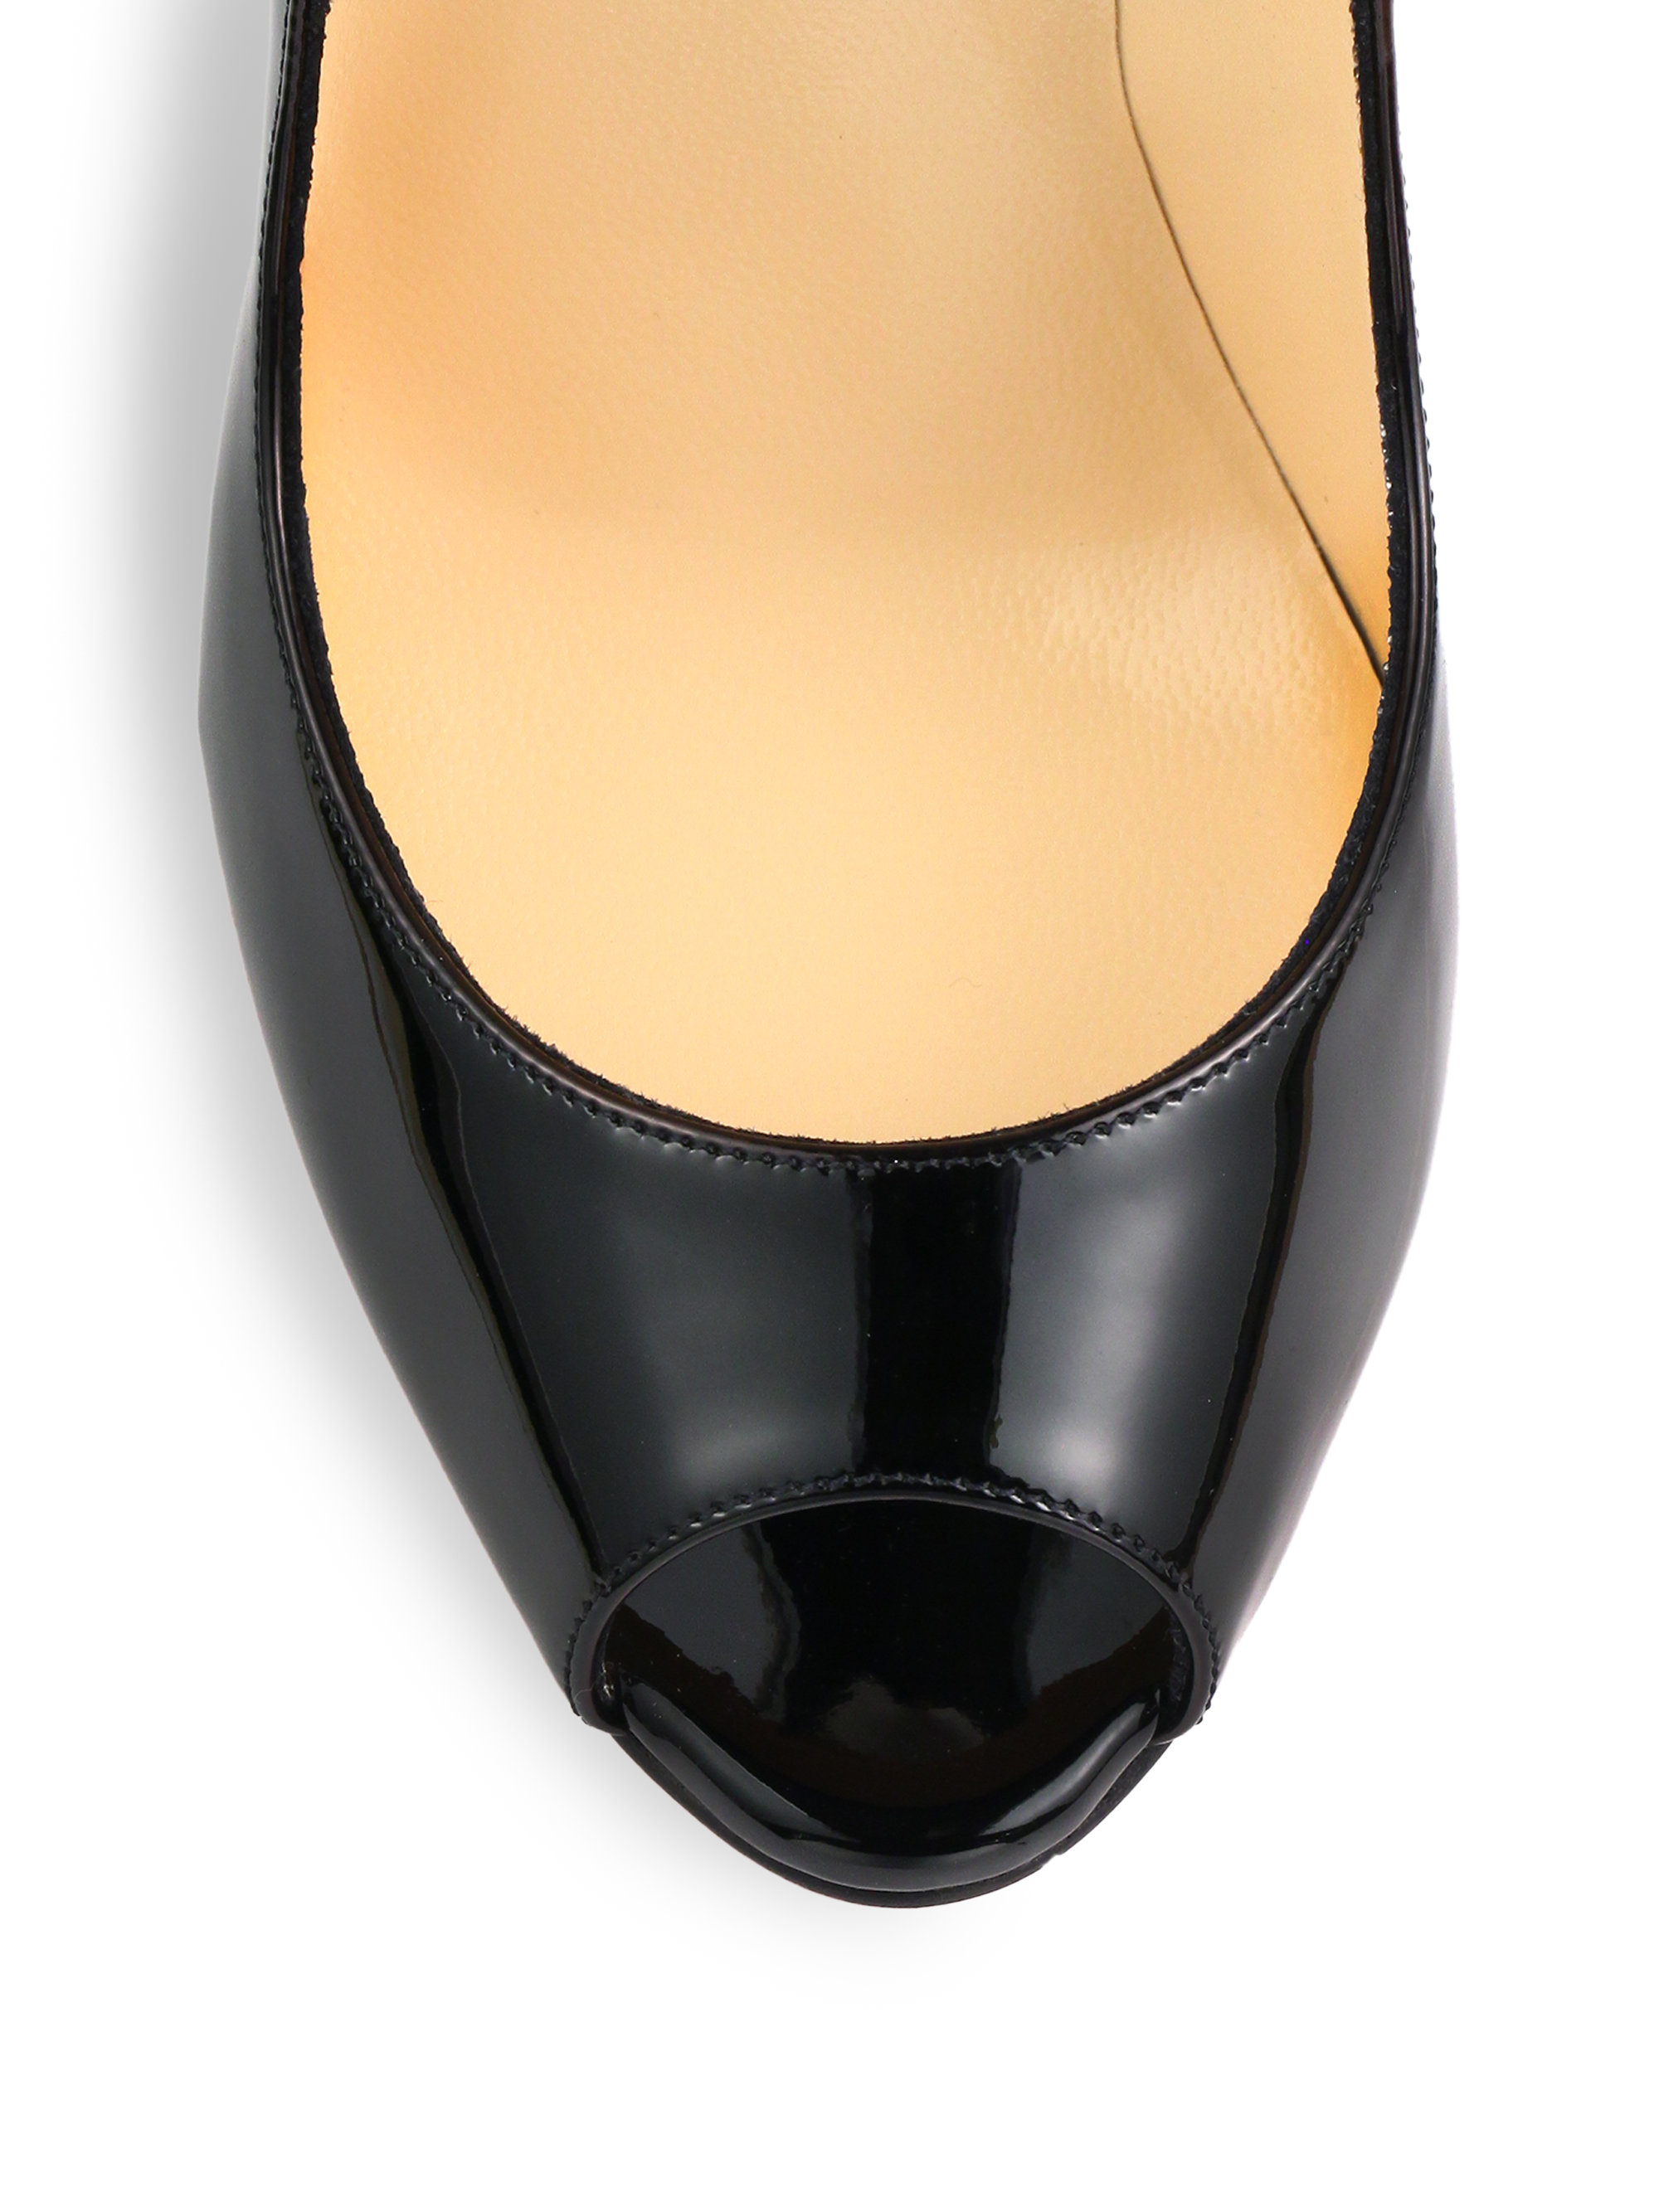 Christian louboutin Youpi Patent Leather Pumps in Black | Lyst  